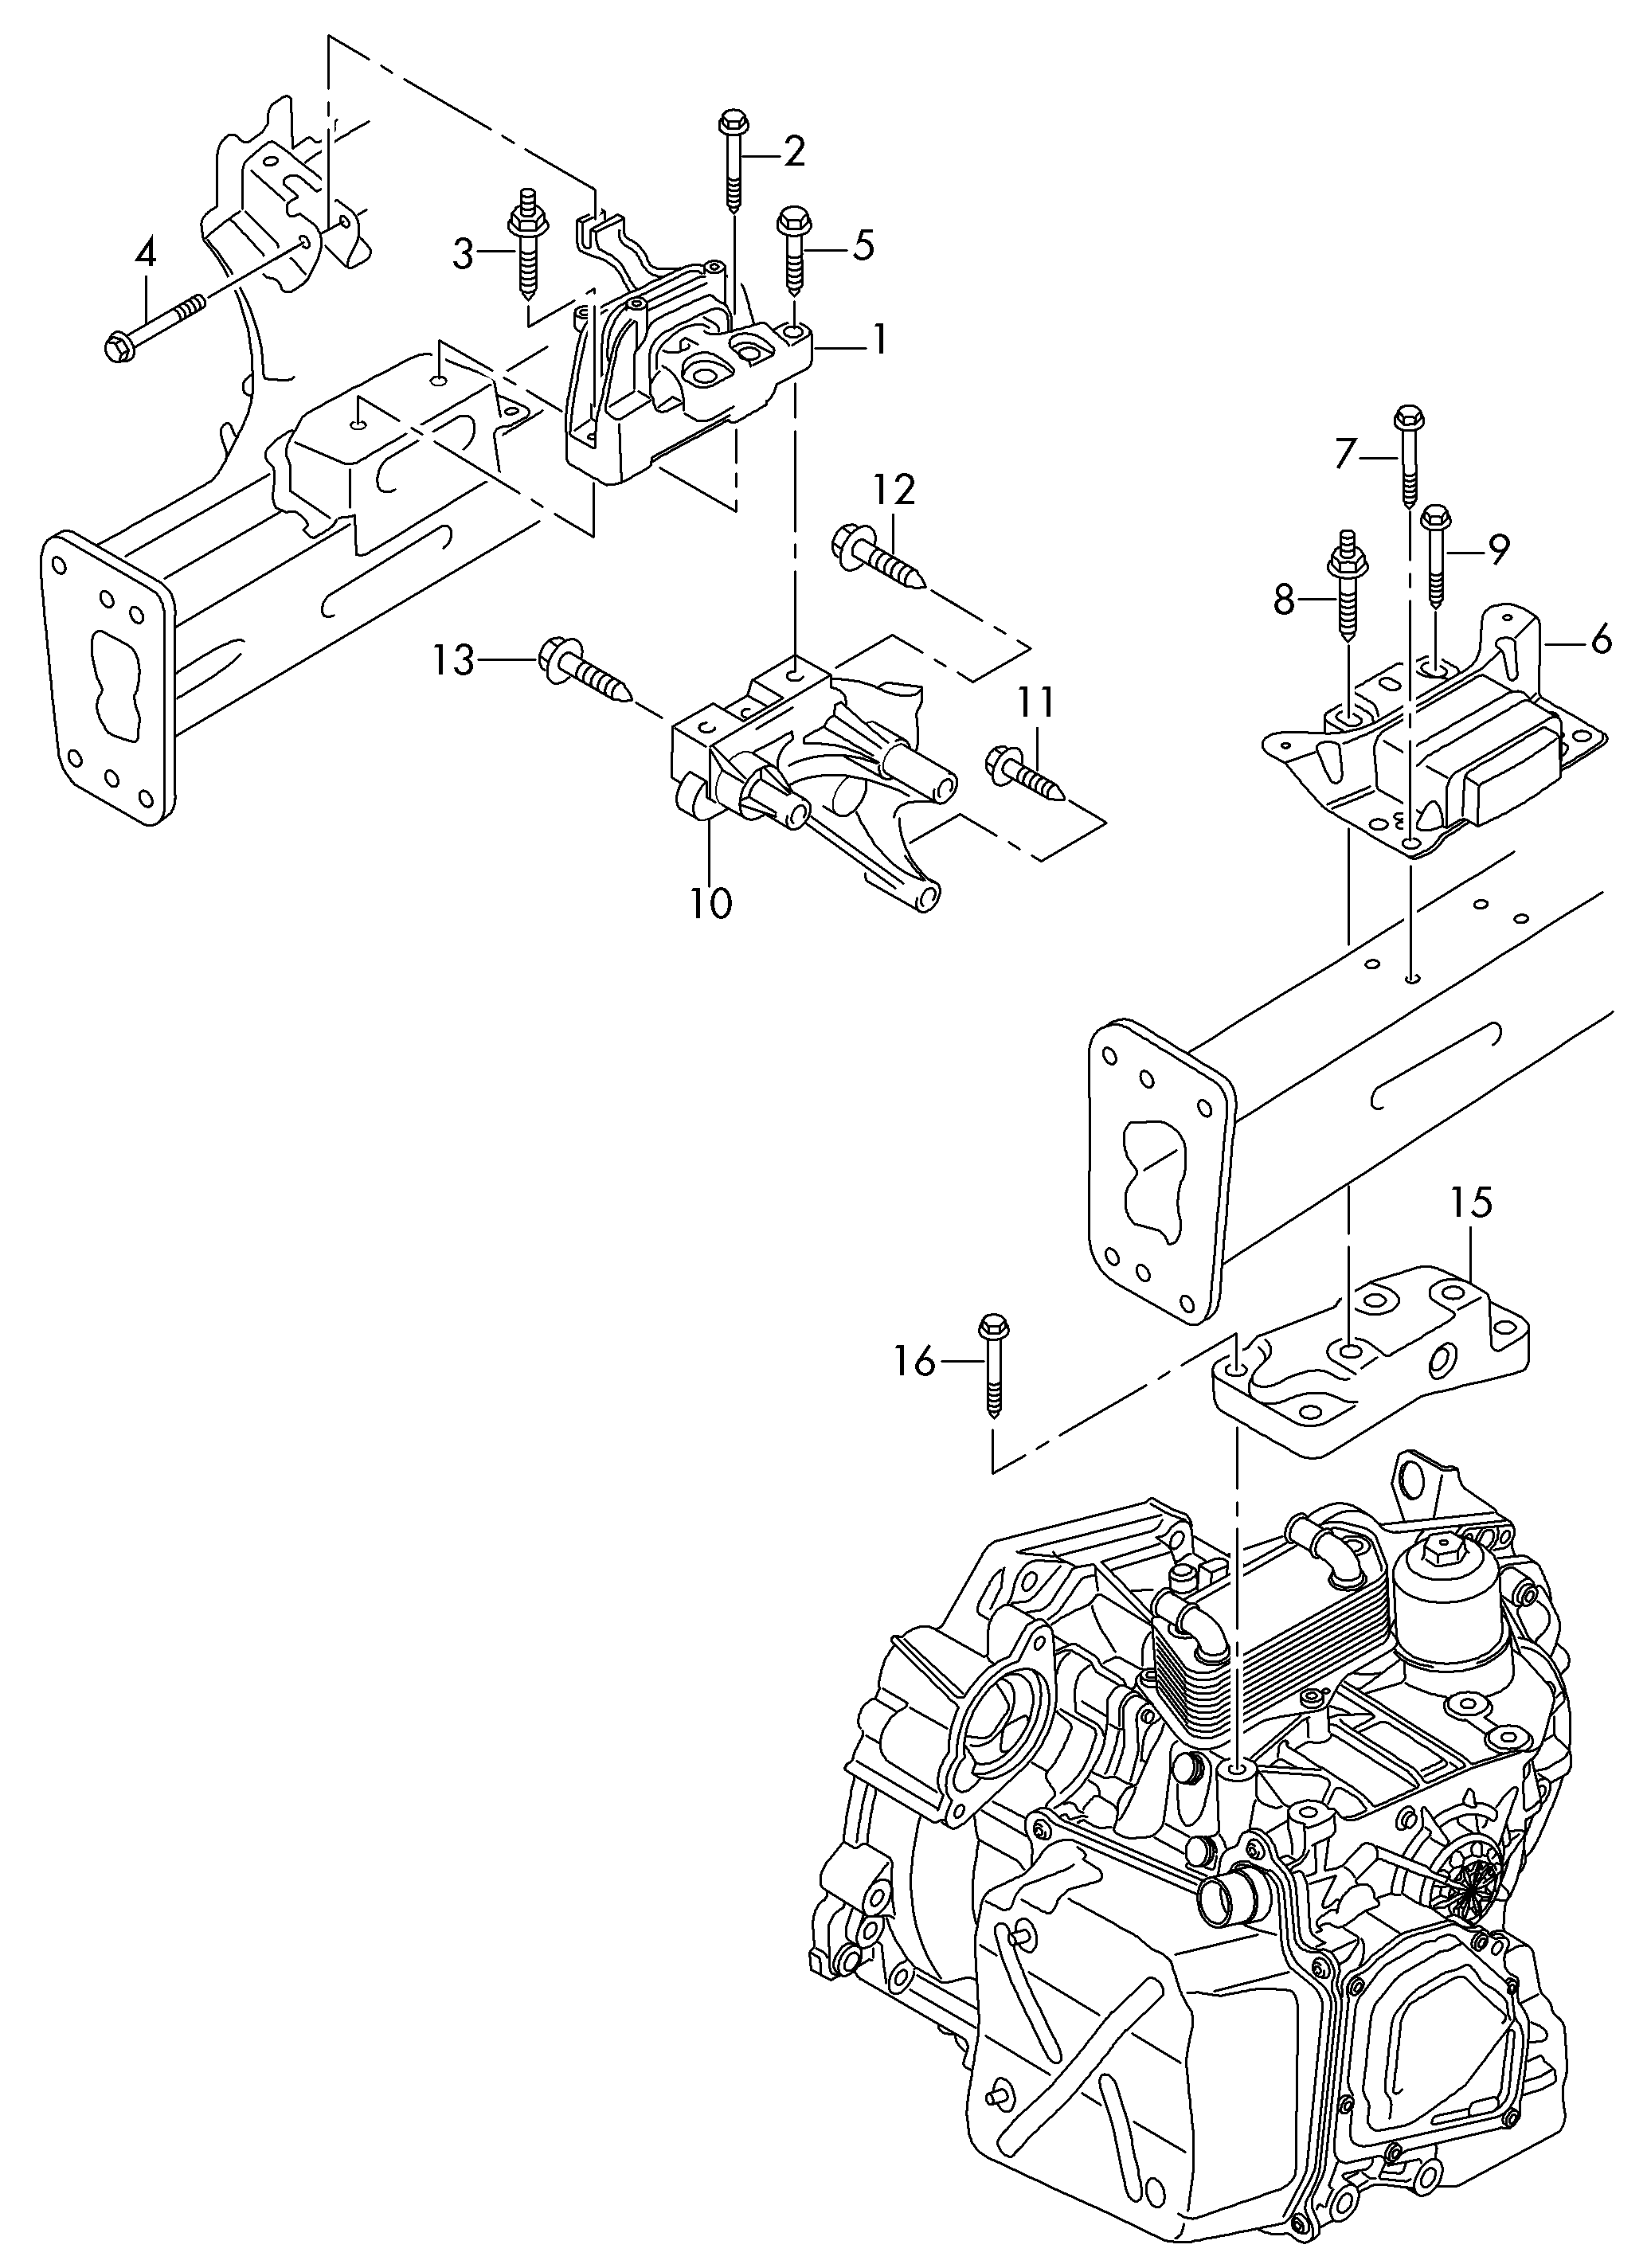 mounting parts for engine and<br>transmission 2.0 Ltr. - Golf - go